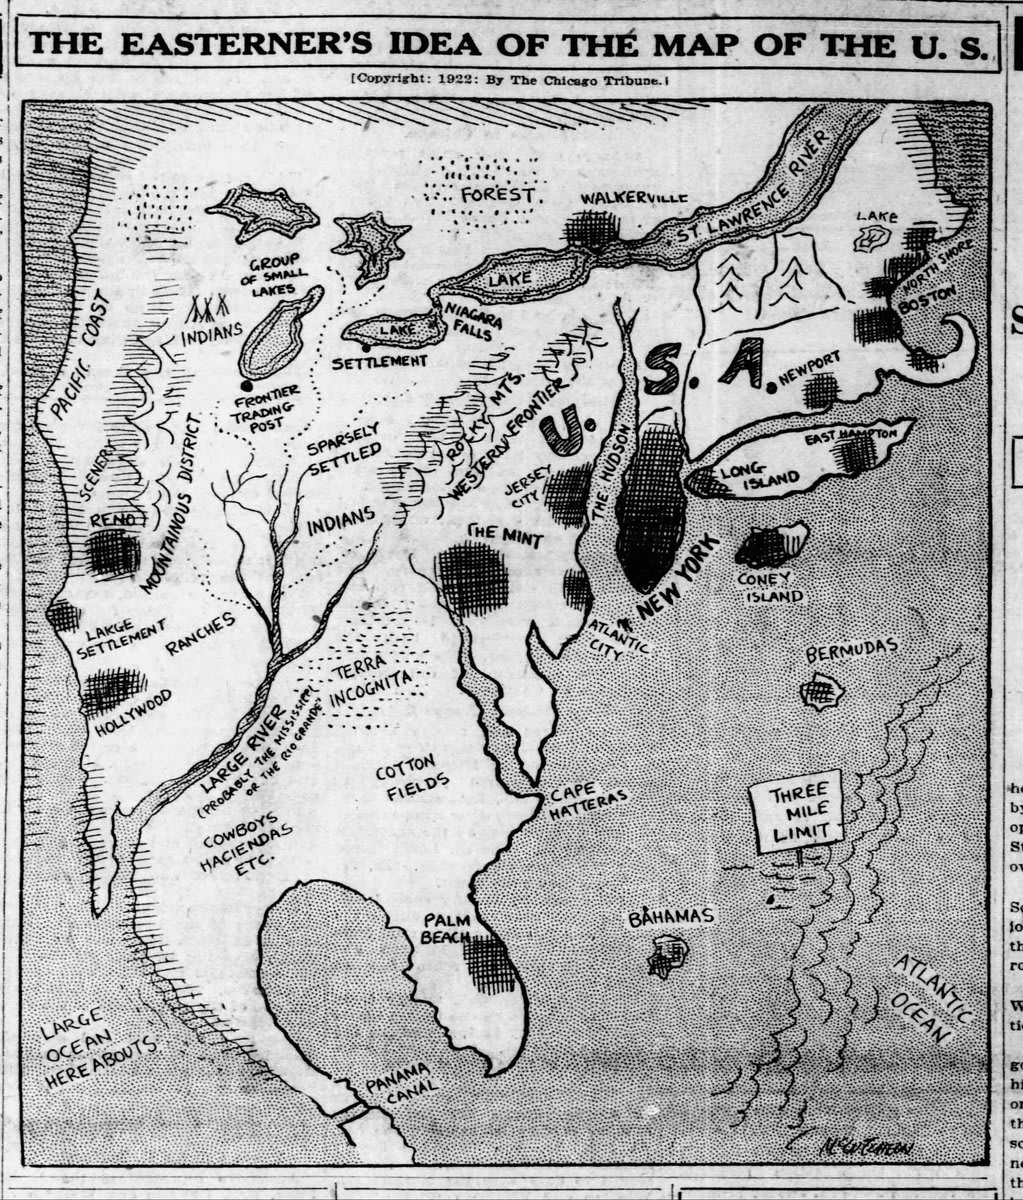 “The Easterner’s Idea Of The Map Of The US,” a satire from the Chicago Tribune.